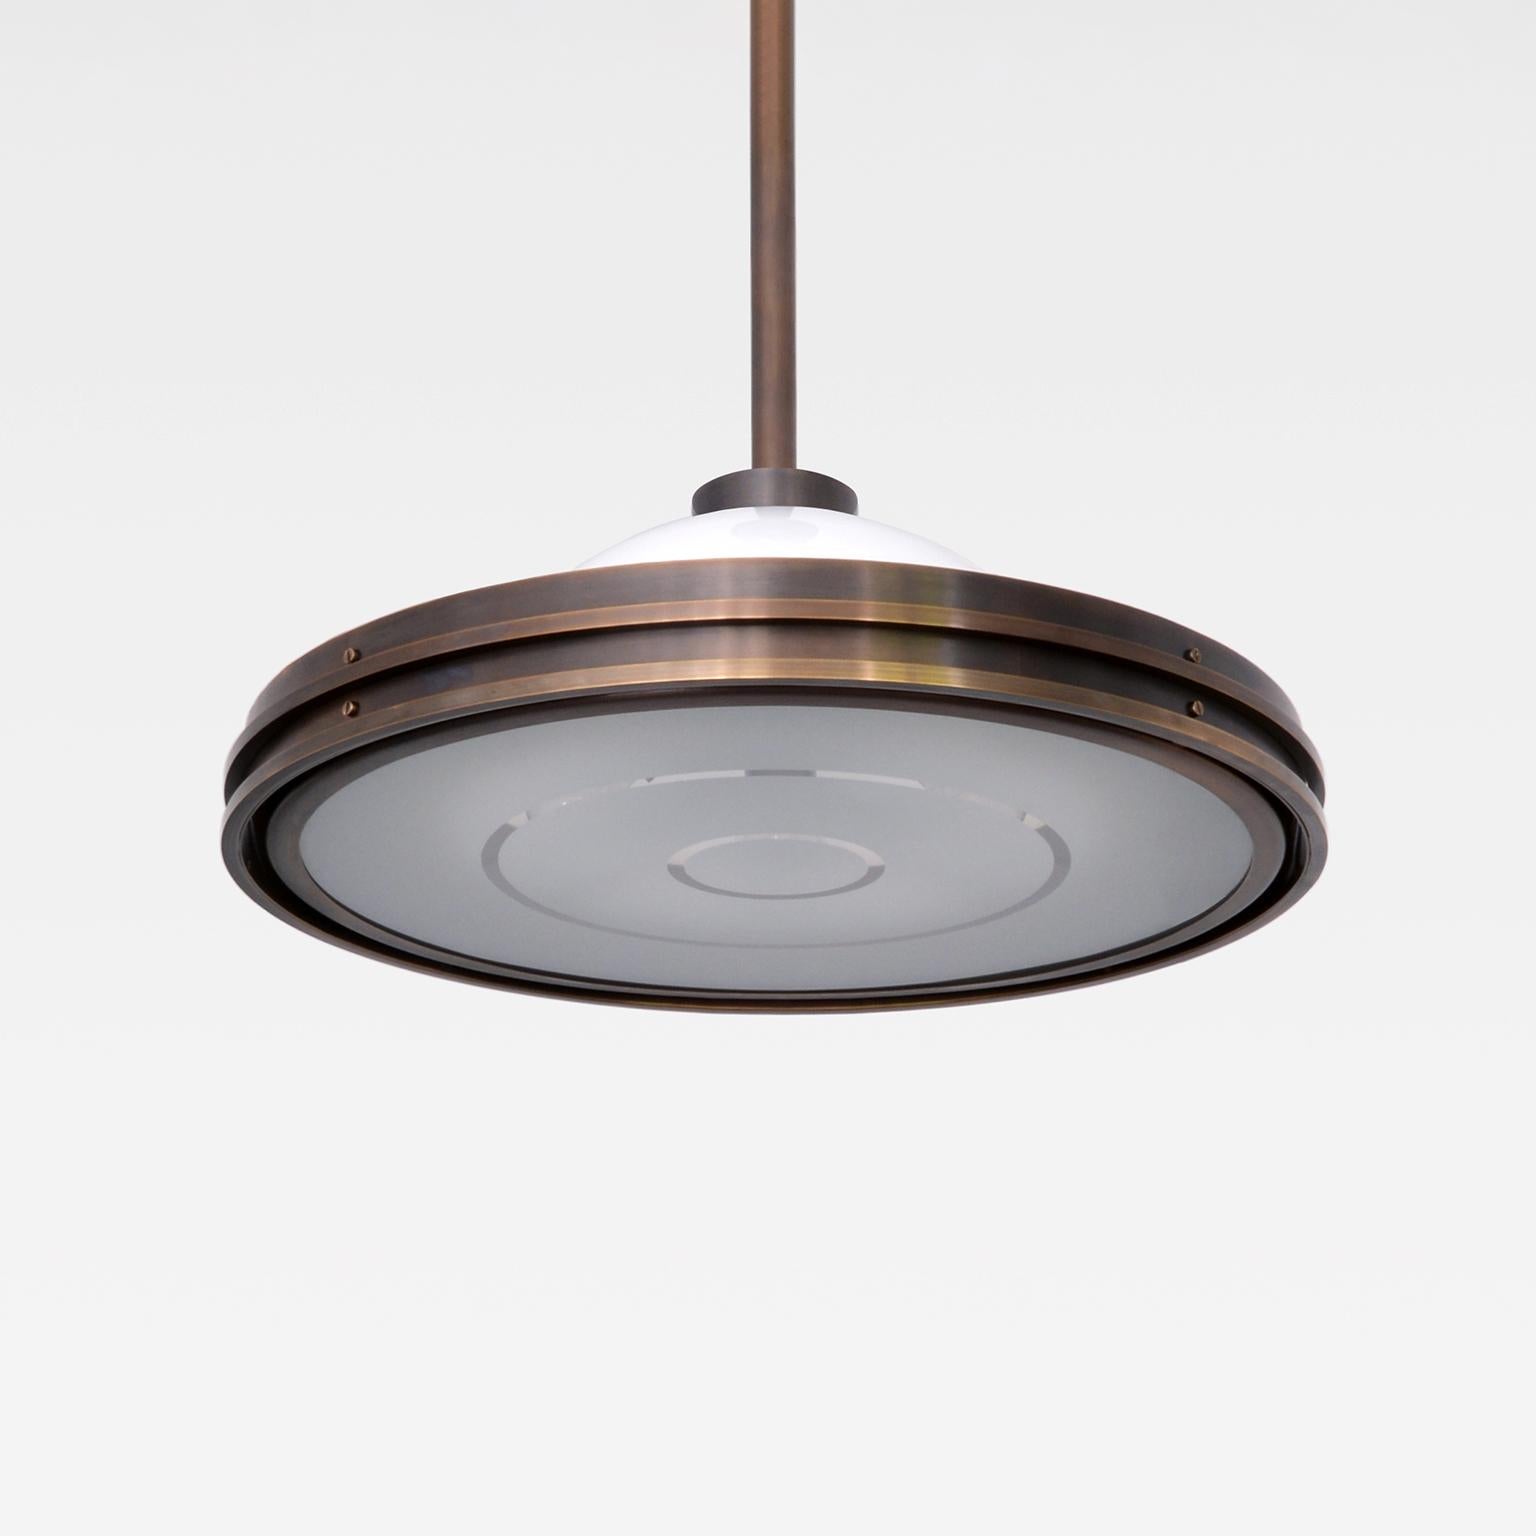 Modernist ceiling light made of dark patinated brass and etched opal glass, customizable.